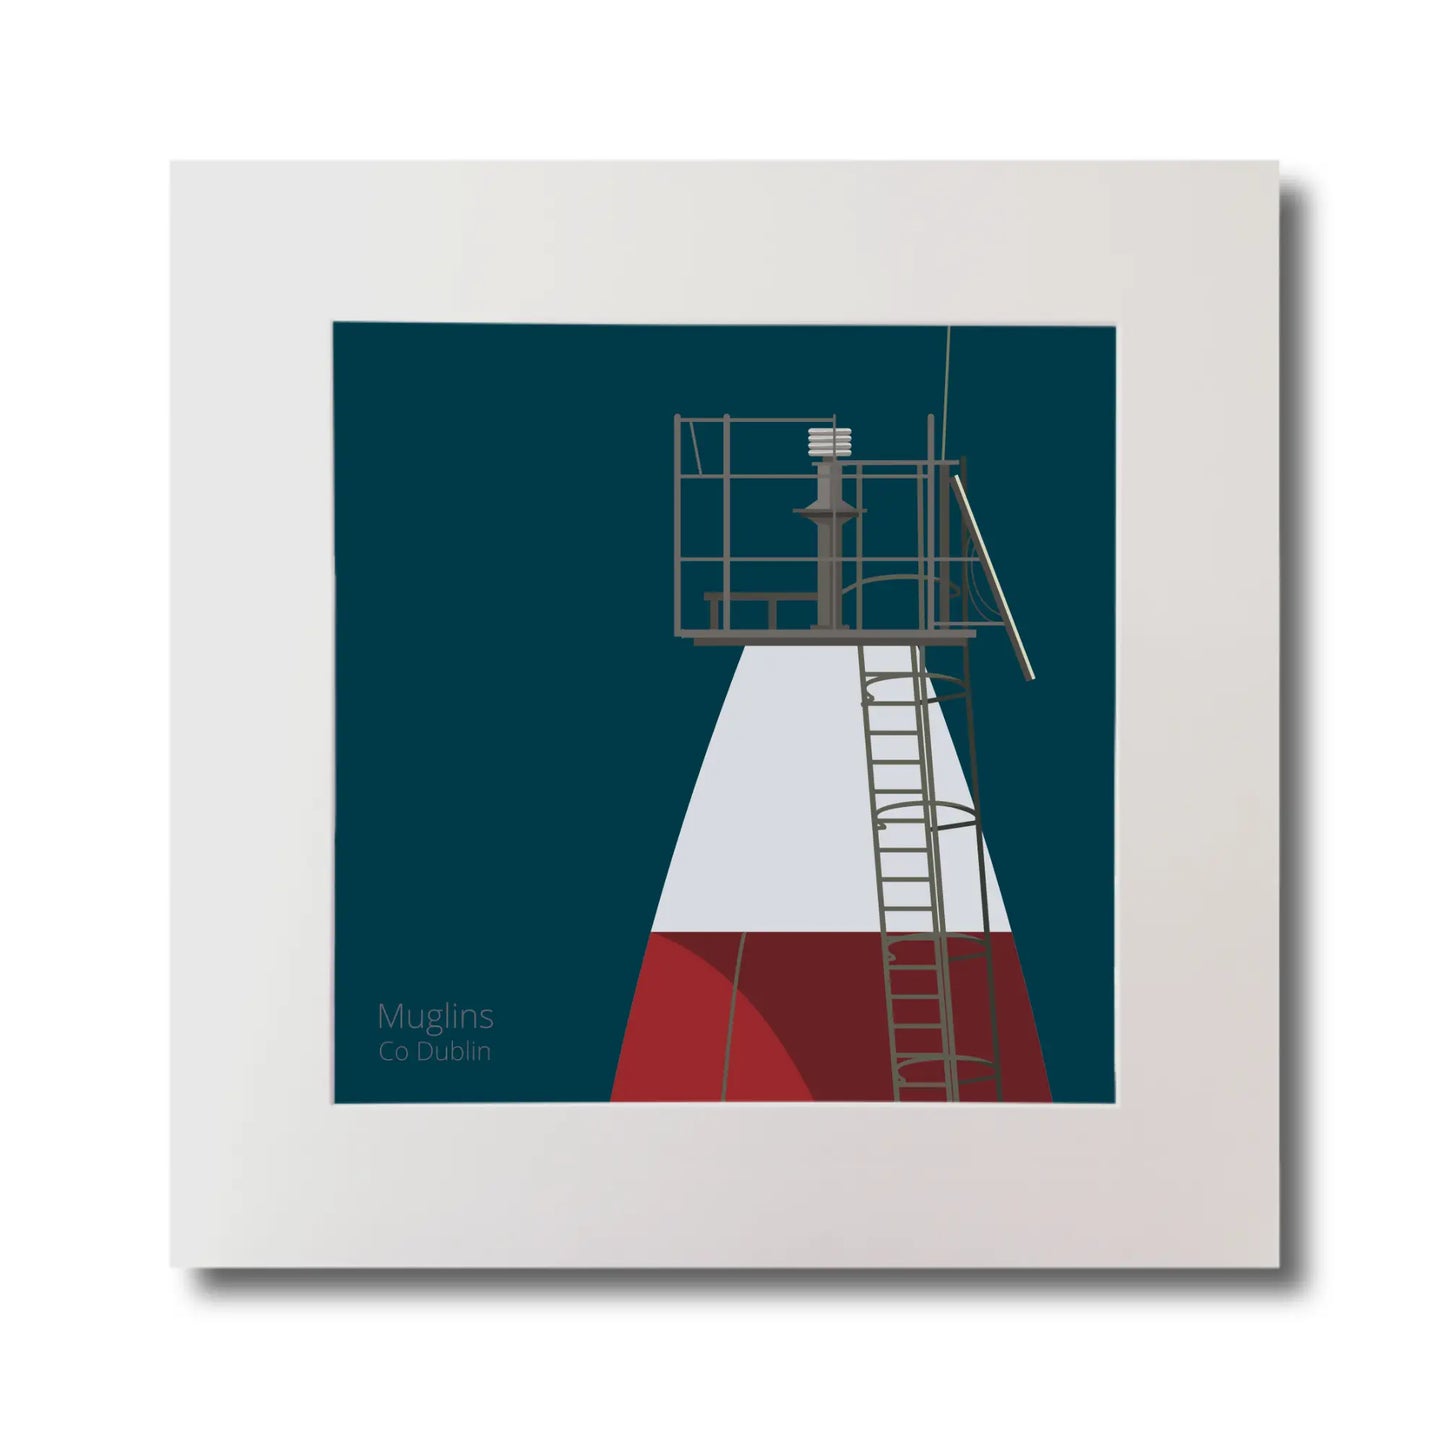 Illustration Muglins lighthouse on a midnight blue background, mounted and measuring 30x30cm.